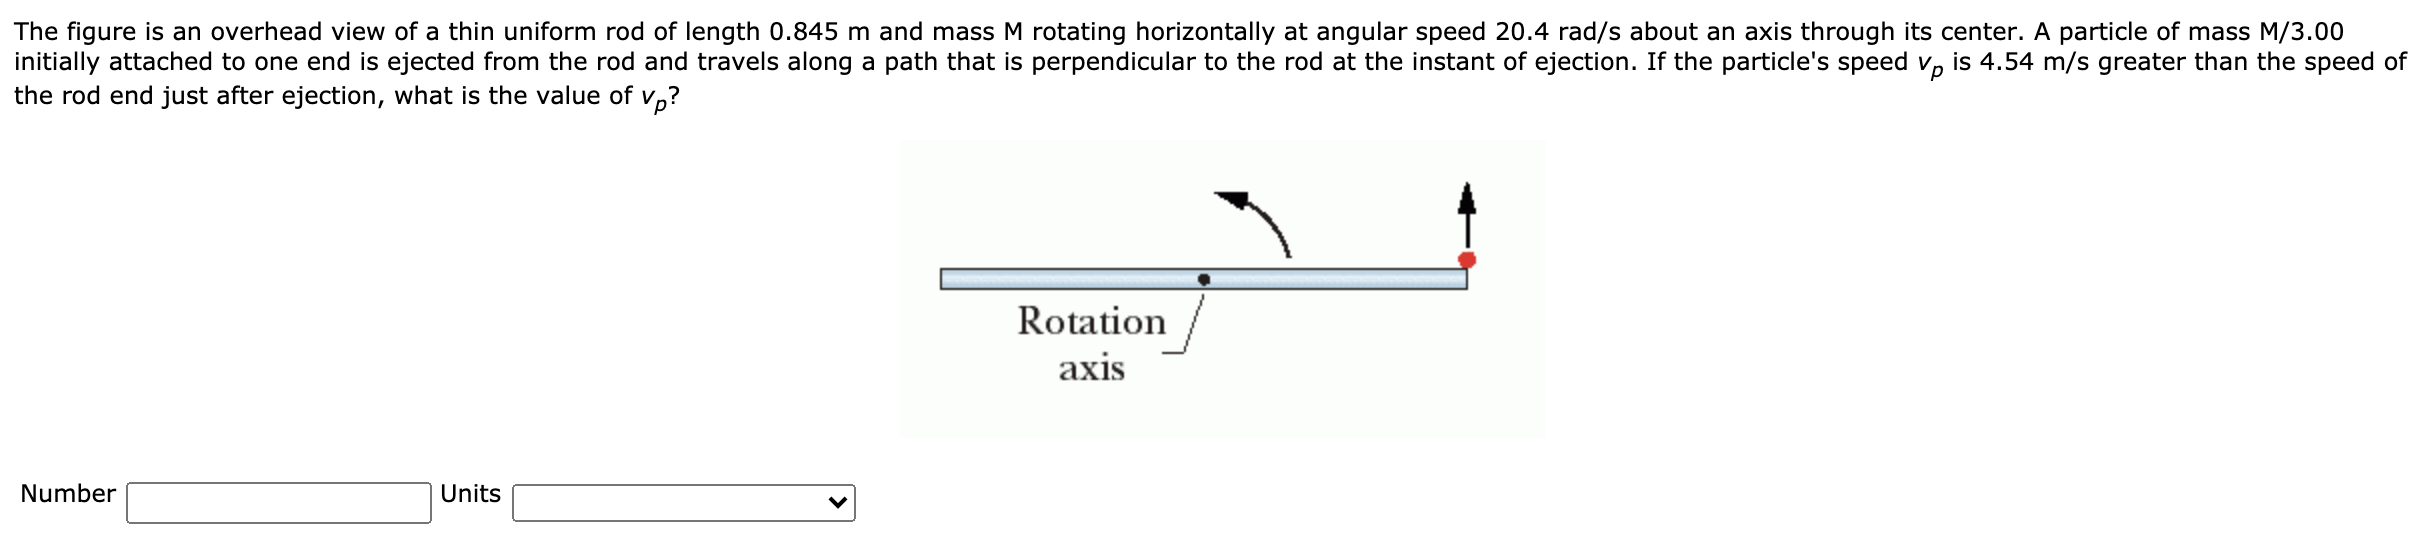 The figure is an overhead view of a thin uniform rod of length 0.845 m and mass M rotating horizontally at angular speed 20.4 rad/s about an axis through its center. A particle of mass M/3.00
nitially attached to one end is ejected from the rod and travels along a path that is perpendicular to the rod at the instant of ejection. If the particle's speed v, is 4.54 m/s greater than the speed of
the rod end just after ejection, what is the value of
Vp?
Rotation
axis
Number
Units
